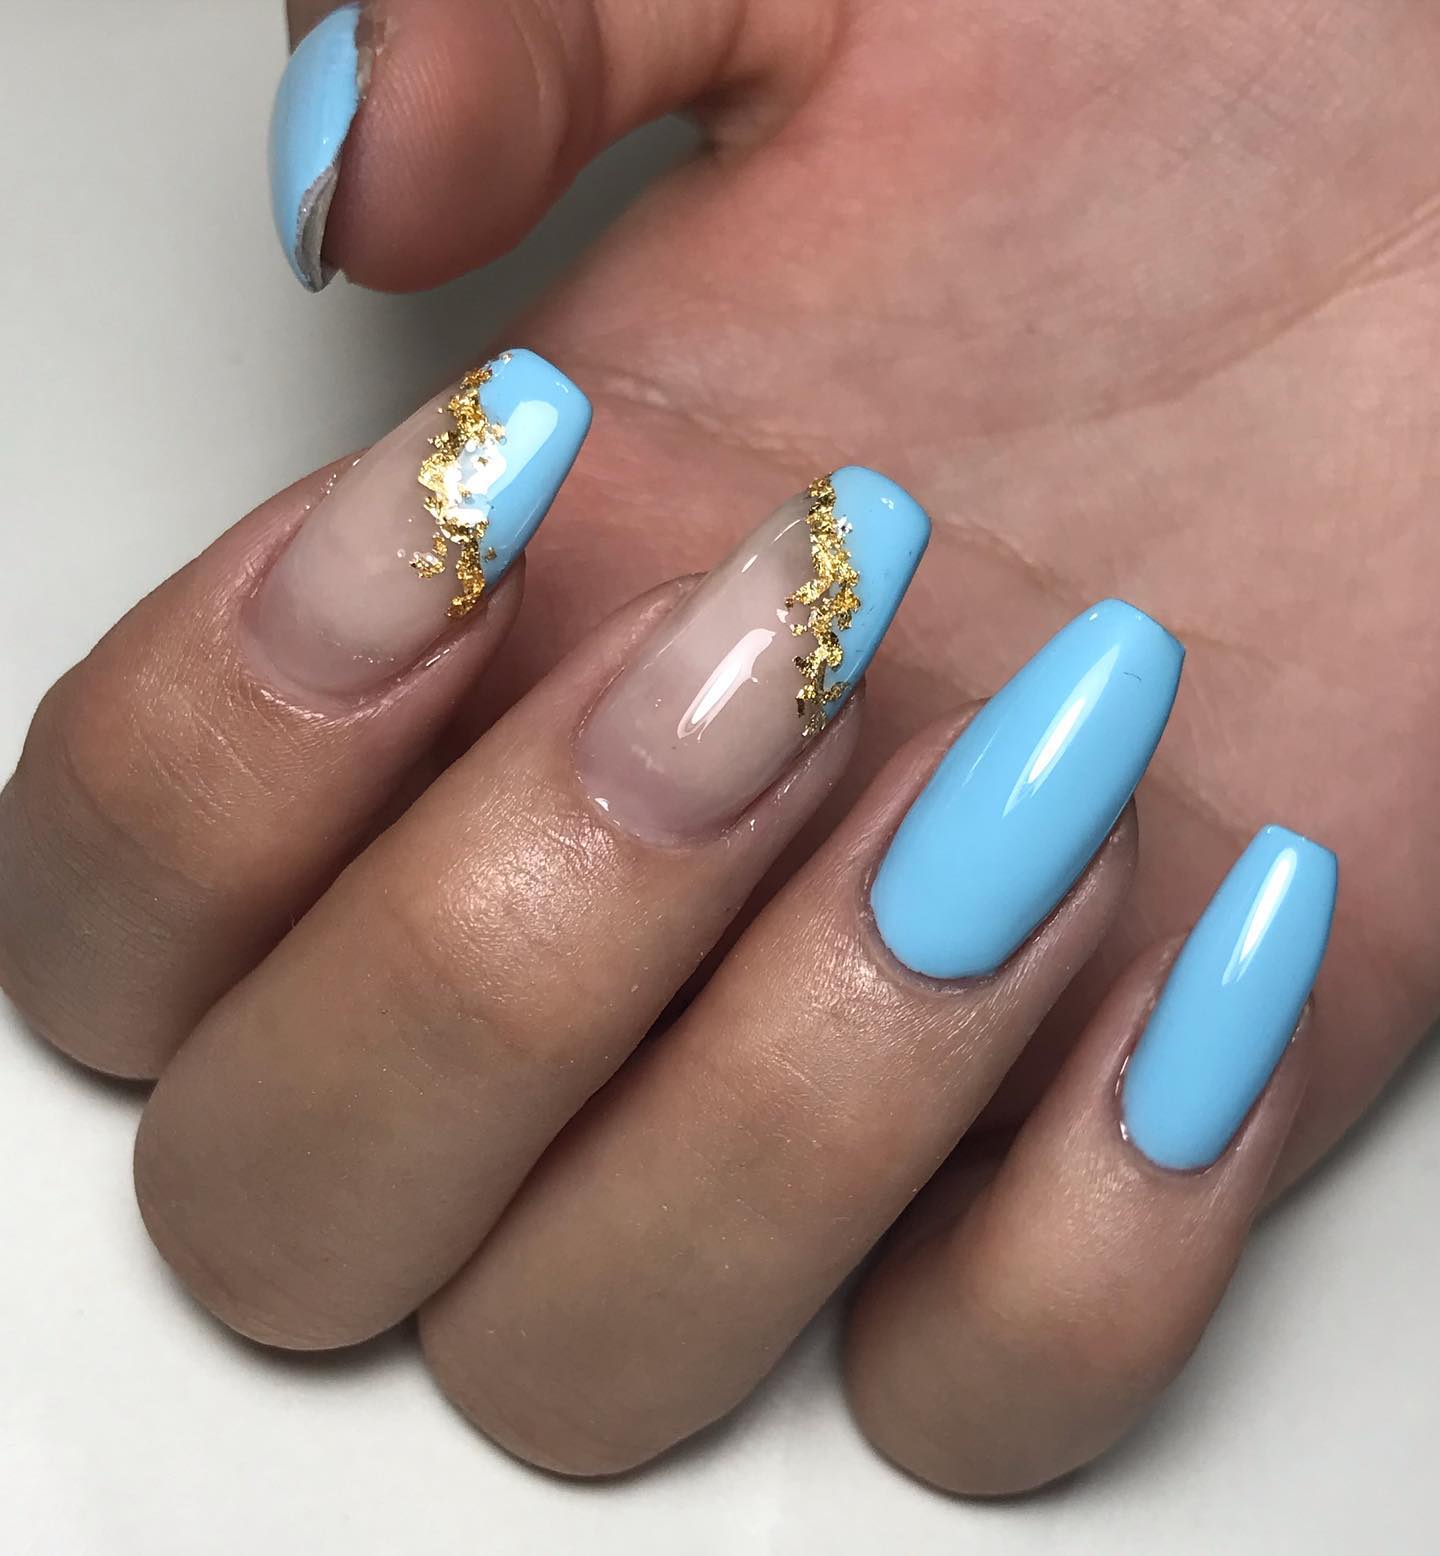 As you see, gold glitters go well with this shade of light blue so much. This cross nail design idea will look amazing on your nails.